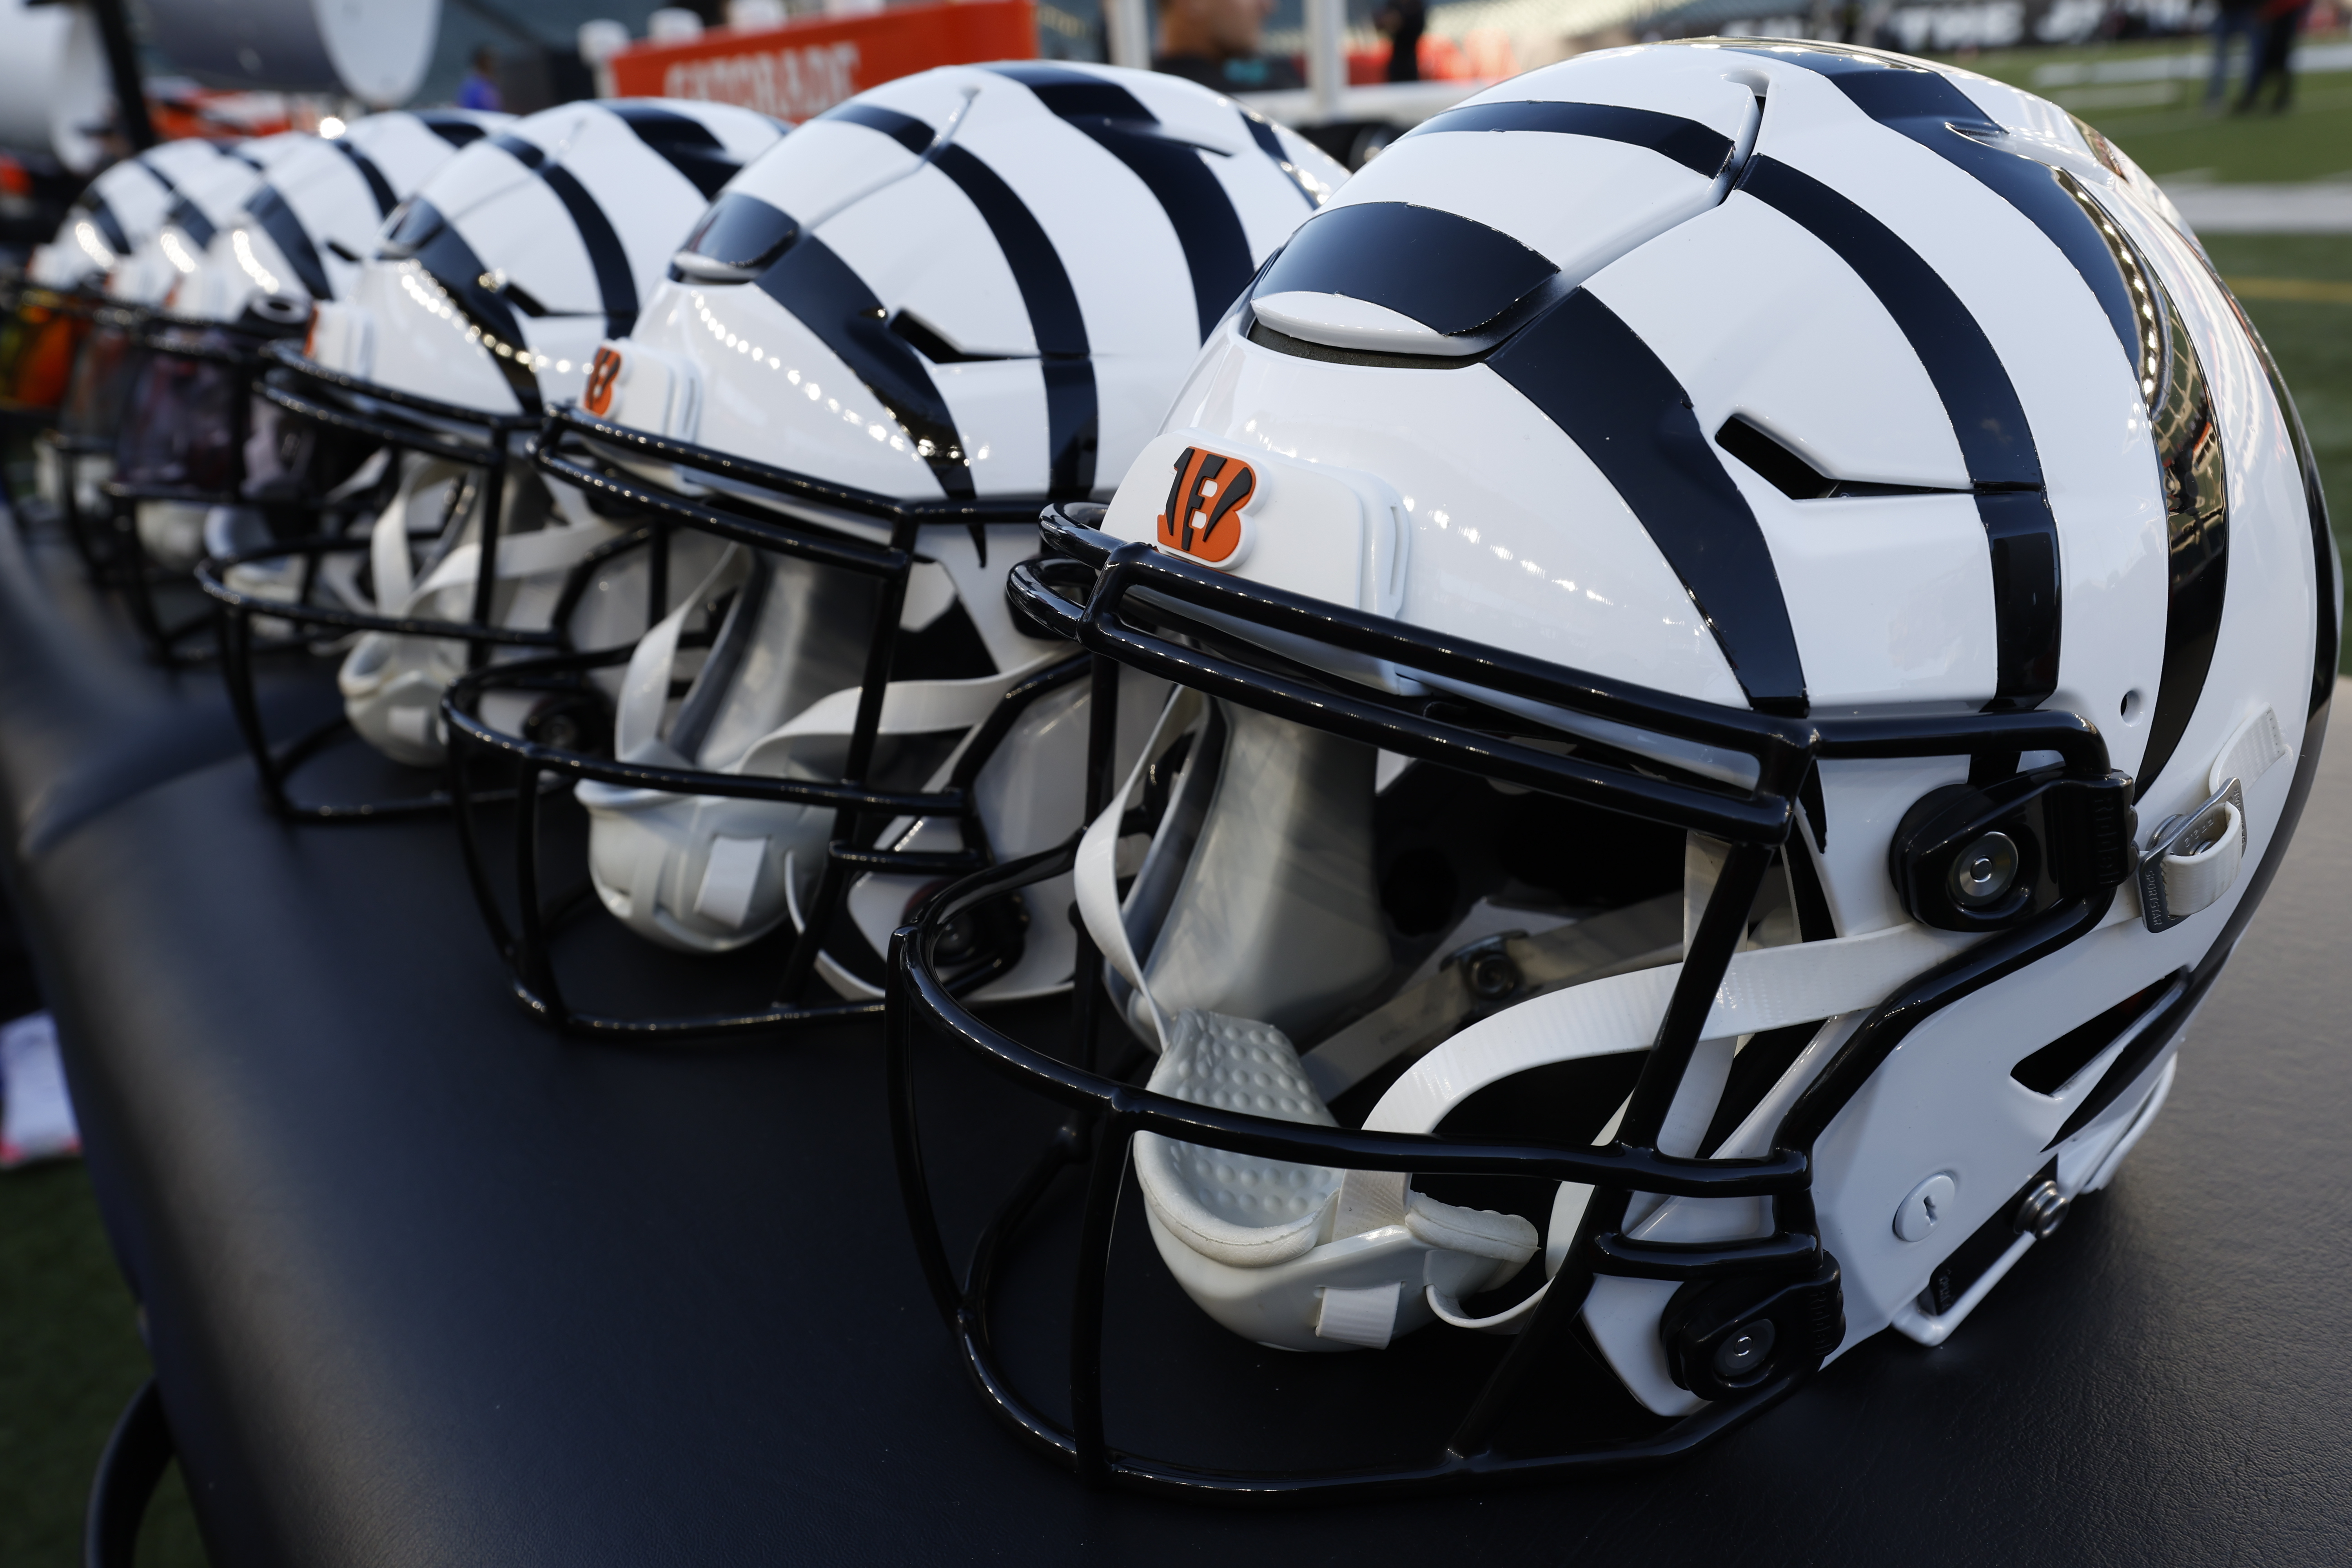 Shifting stripes': Bengals switch up uniform look for 2023-24 season